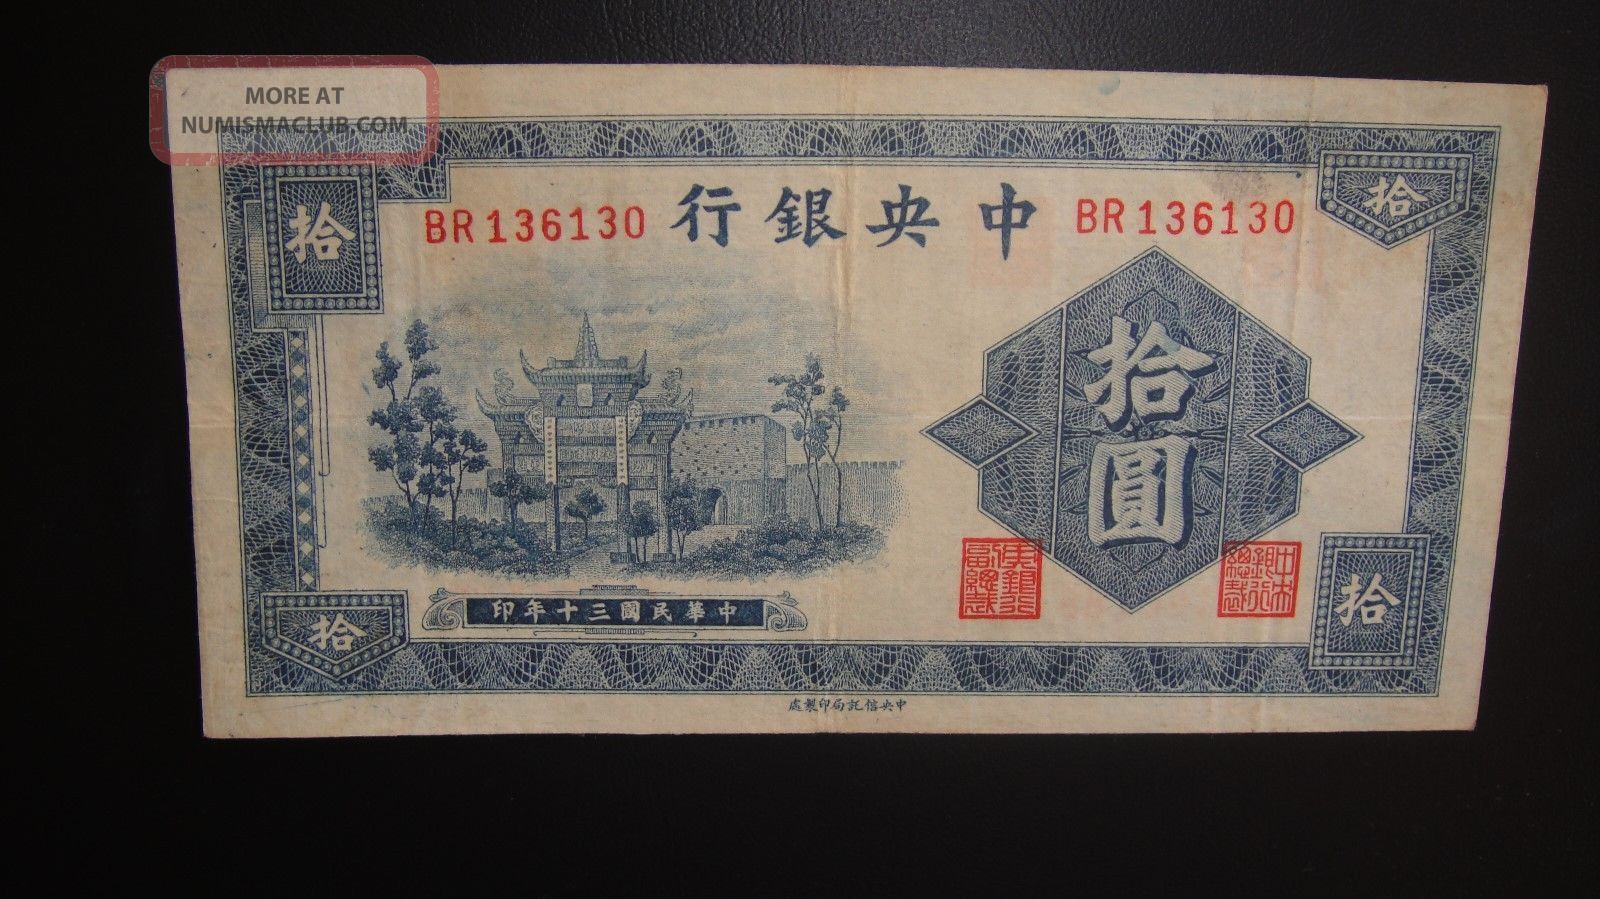 The Central Bank Of China 1941 Paper Money 10 Yuan Banknote /br136130 Asia photo